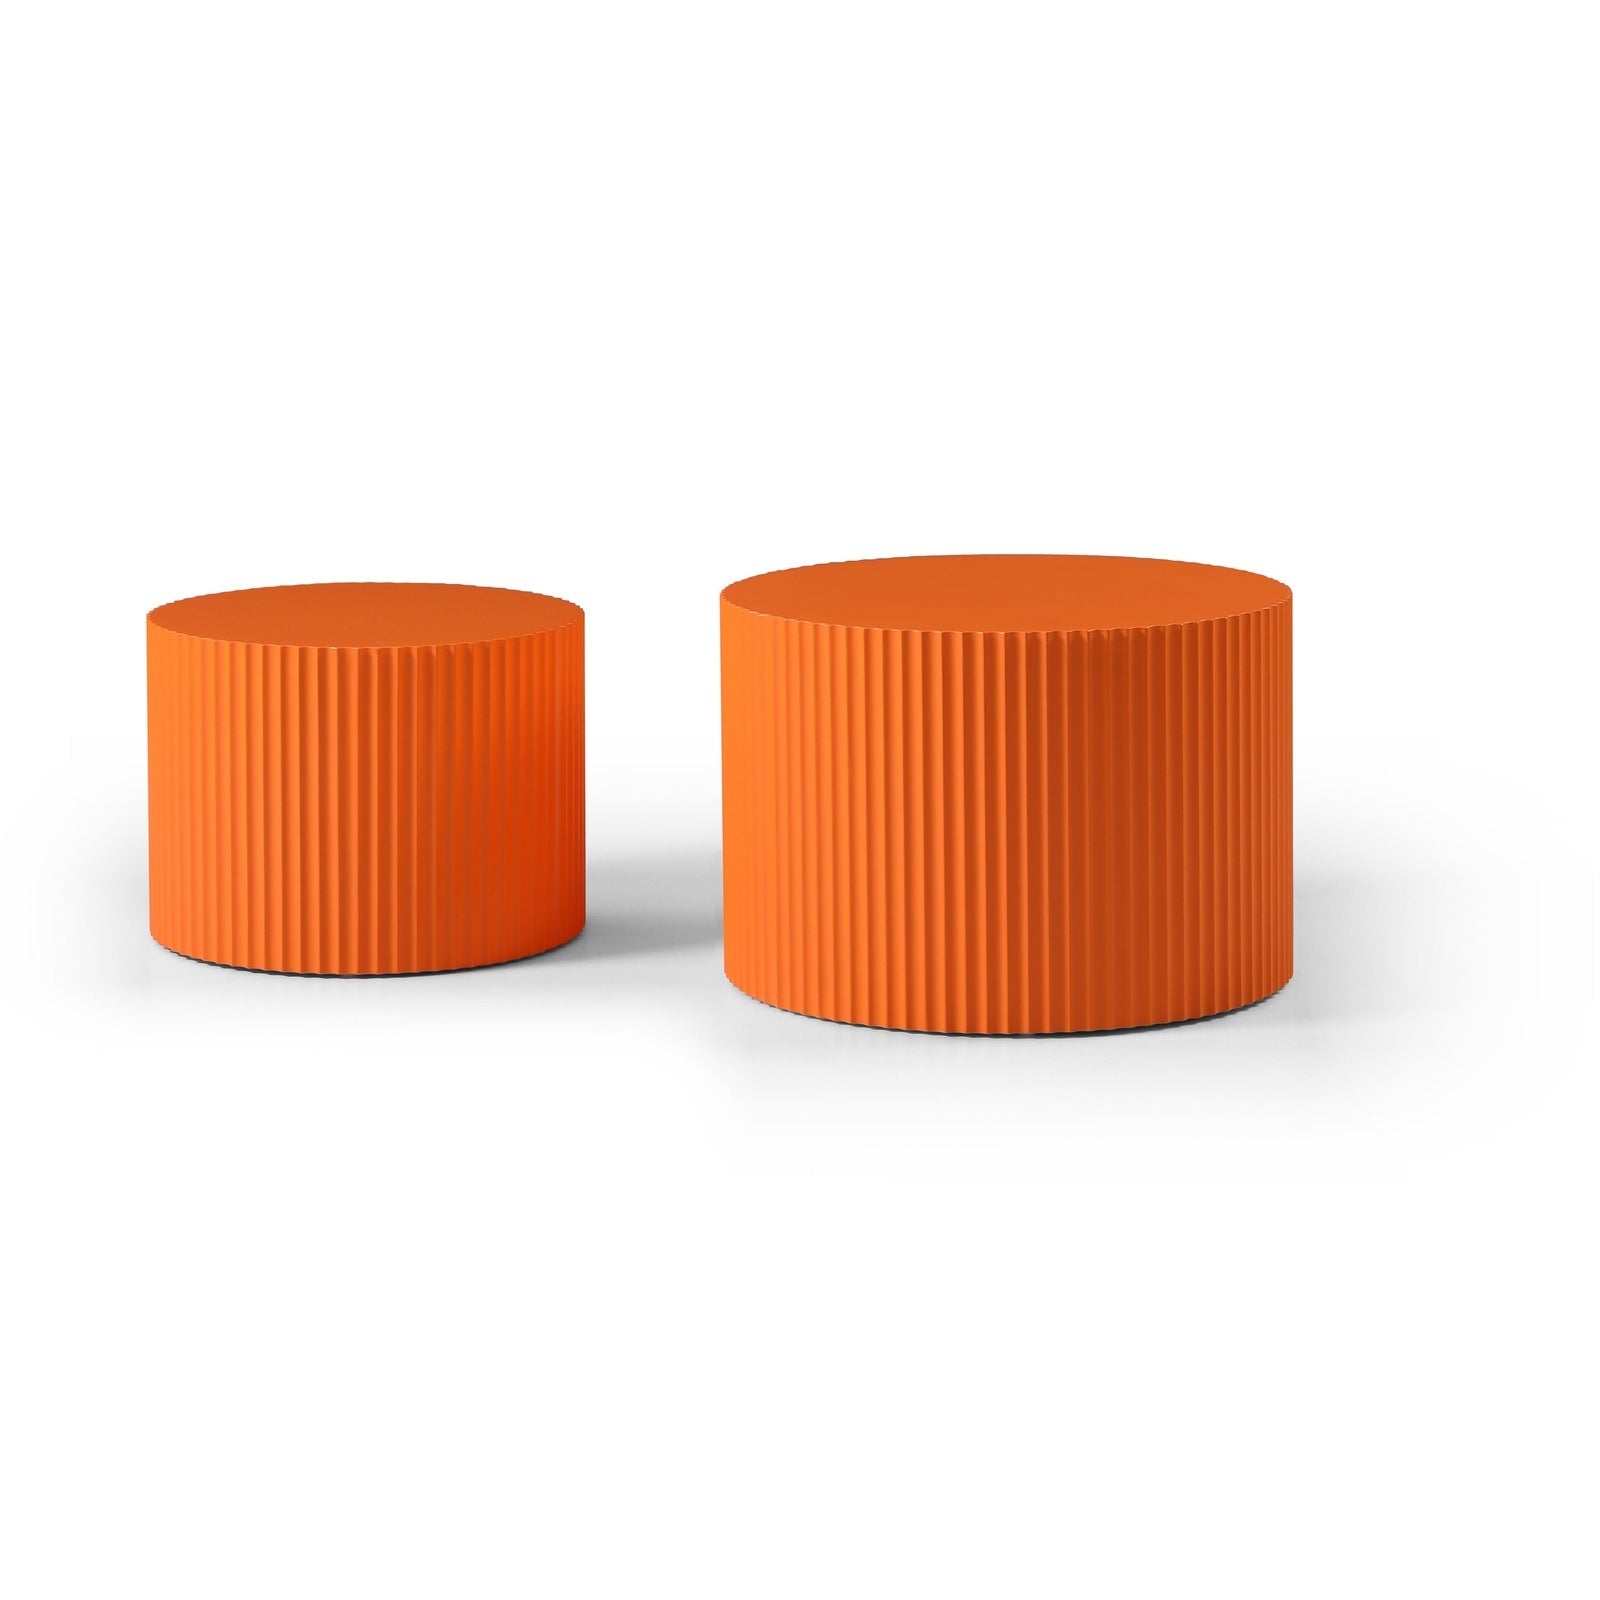 MDF Nesting Table Set of 2,Handcraft Round Coffee Table for Living Room/Leisure Area, Orange